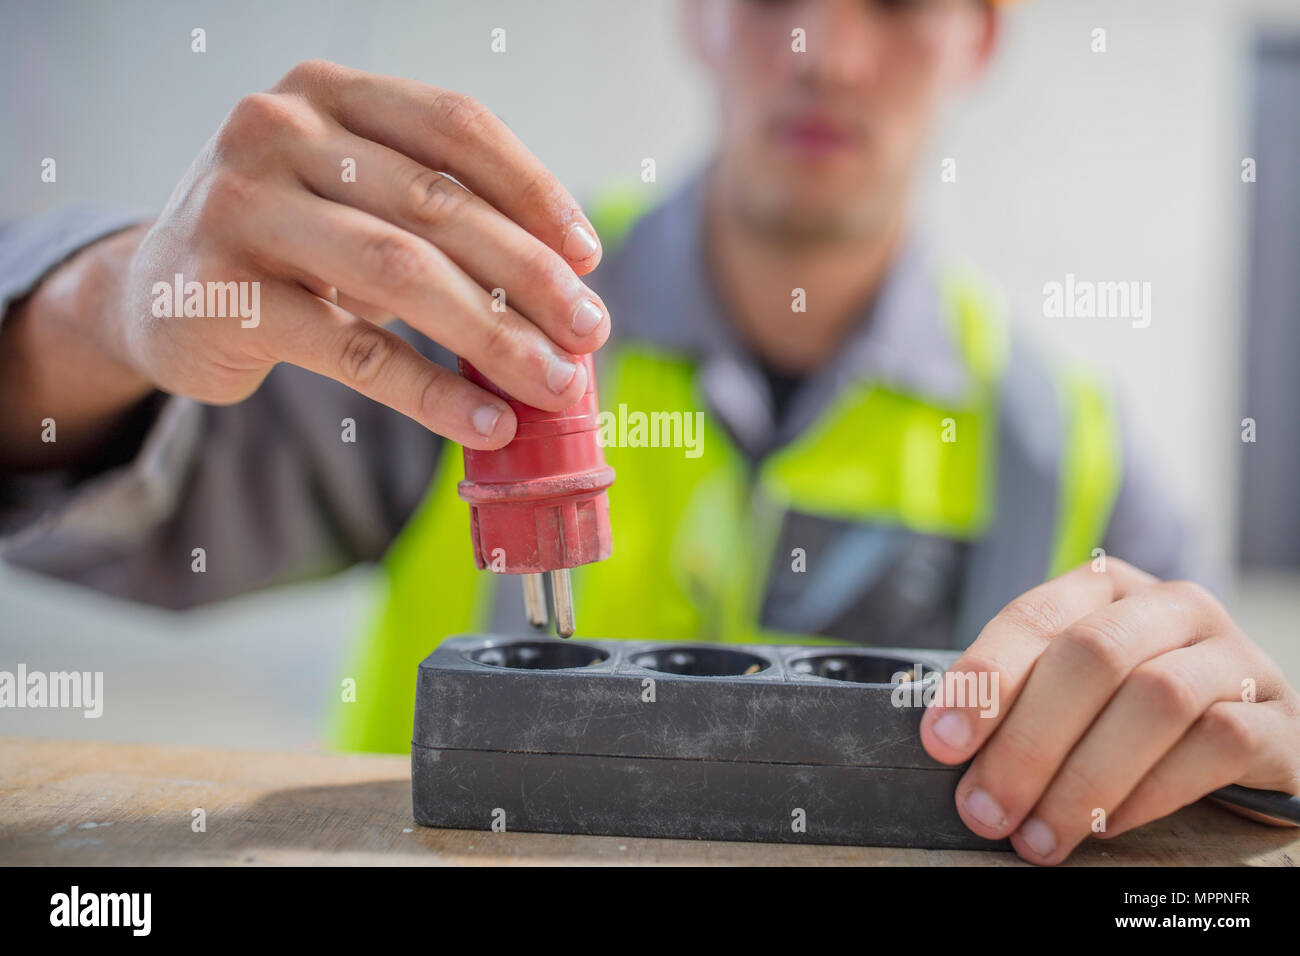 Close-up of electrician putting plug into power strip Stock Photo